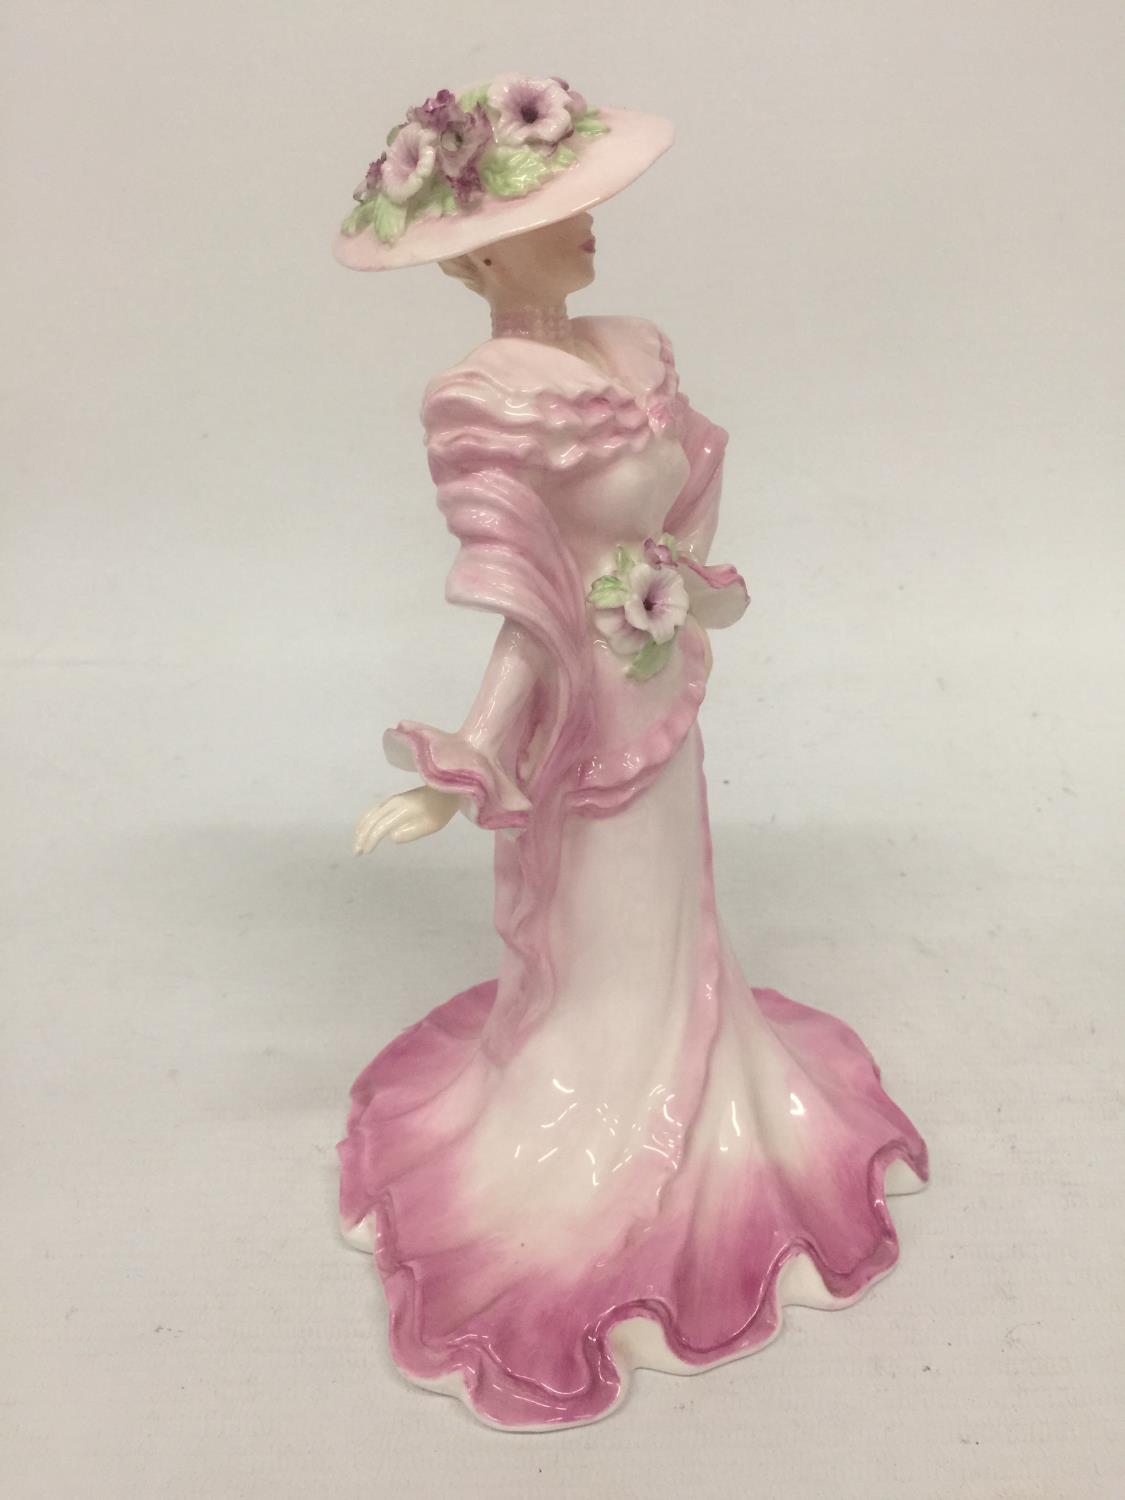 A COALPORT FIGURINE "WINNING STROKE" THE ROMANCE OF HENLEY COLLECTION LIMITED EDITION NO. 150 OF - Image 2 of 5